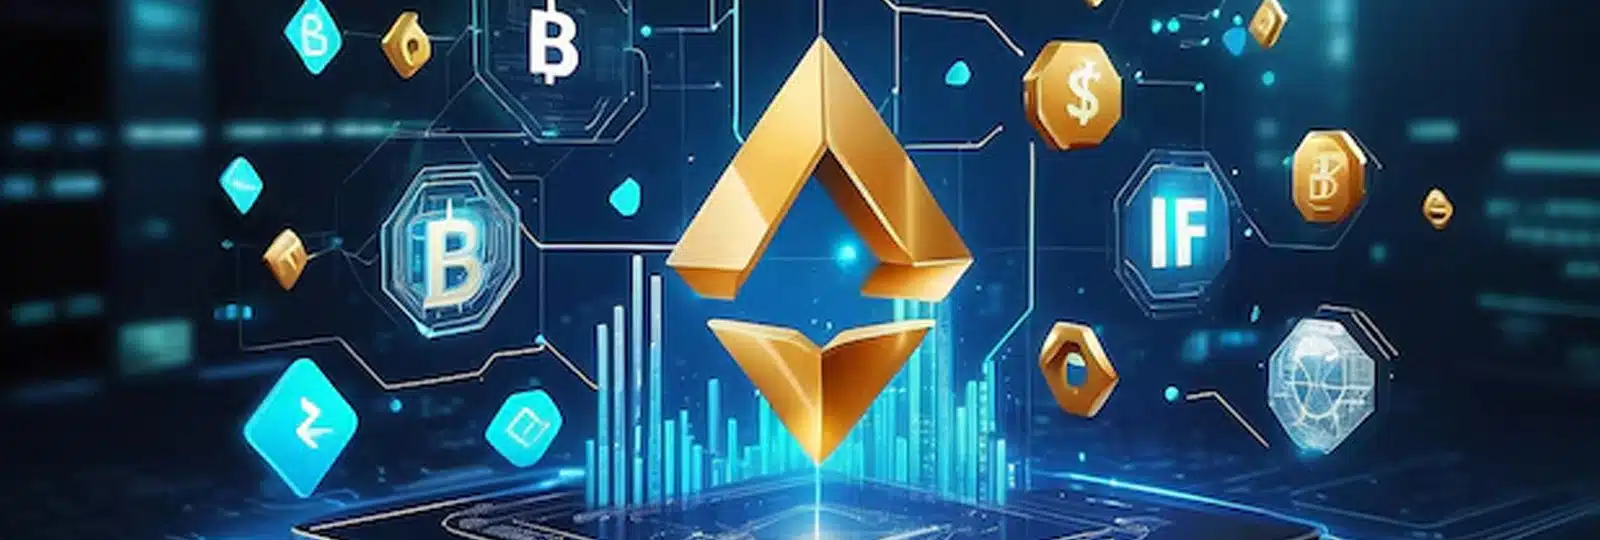 Ethereum vs. Other cryptocurrencies as an investment